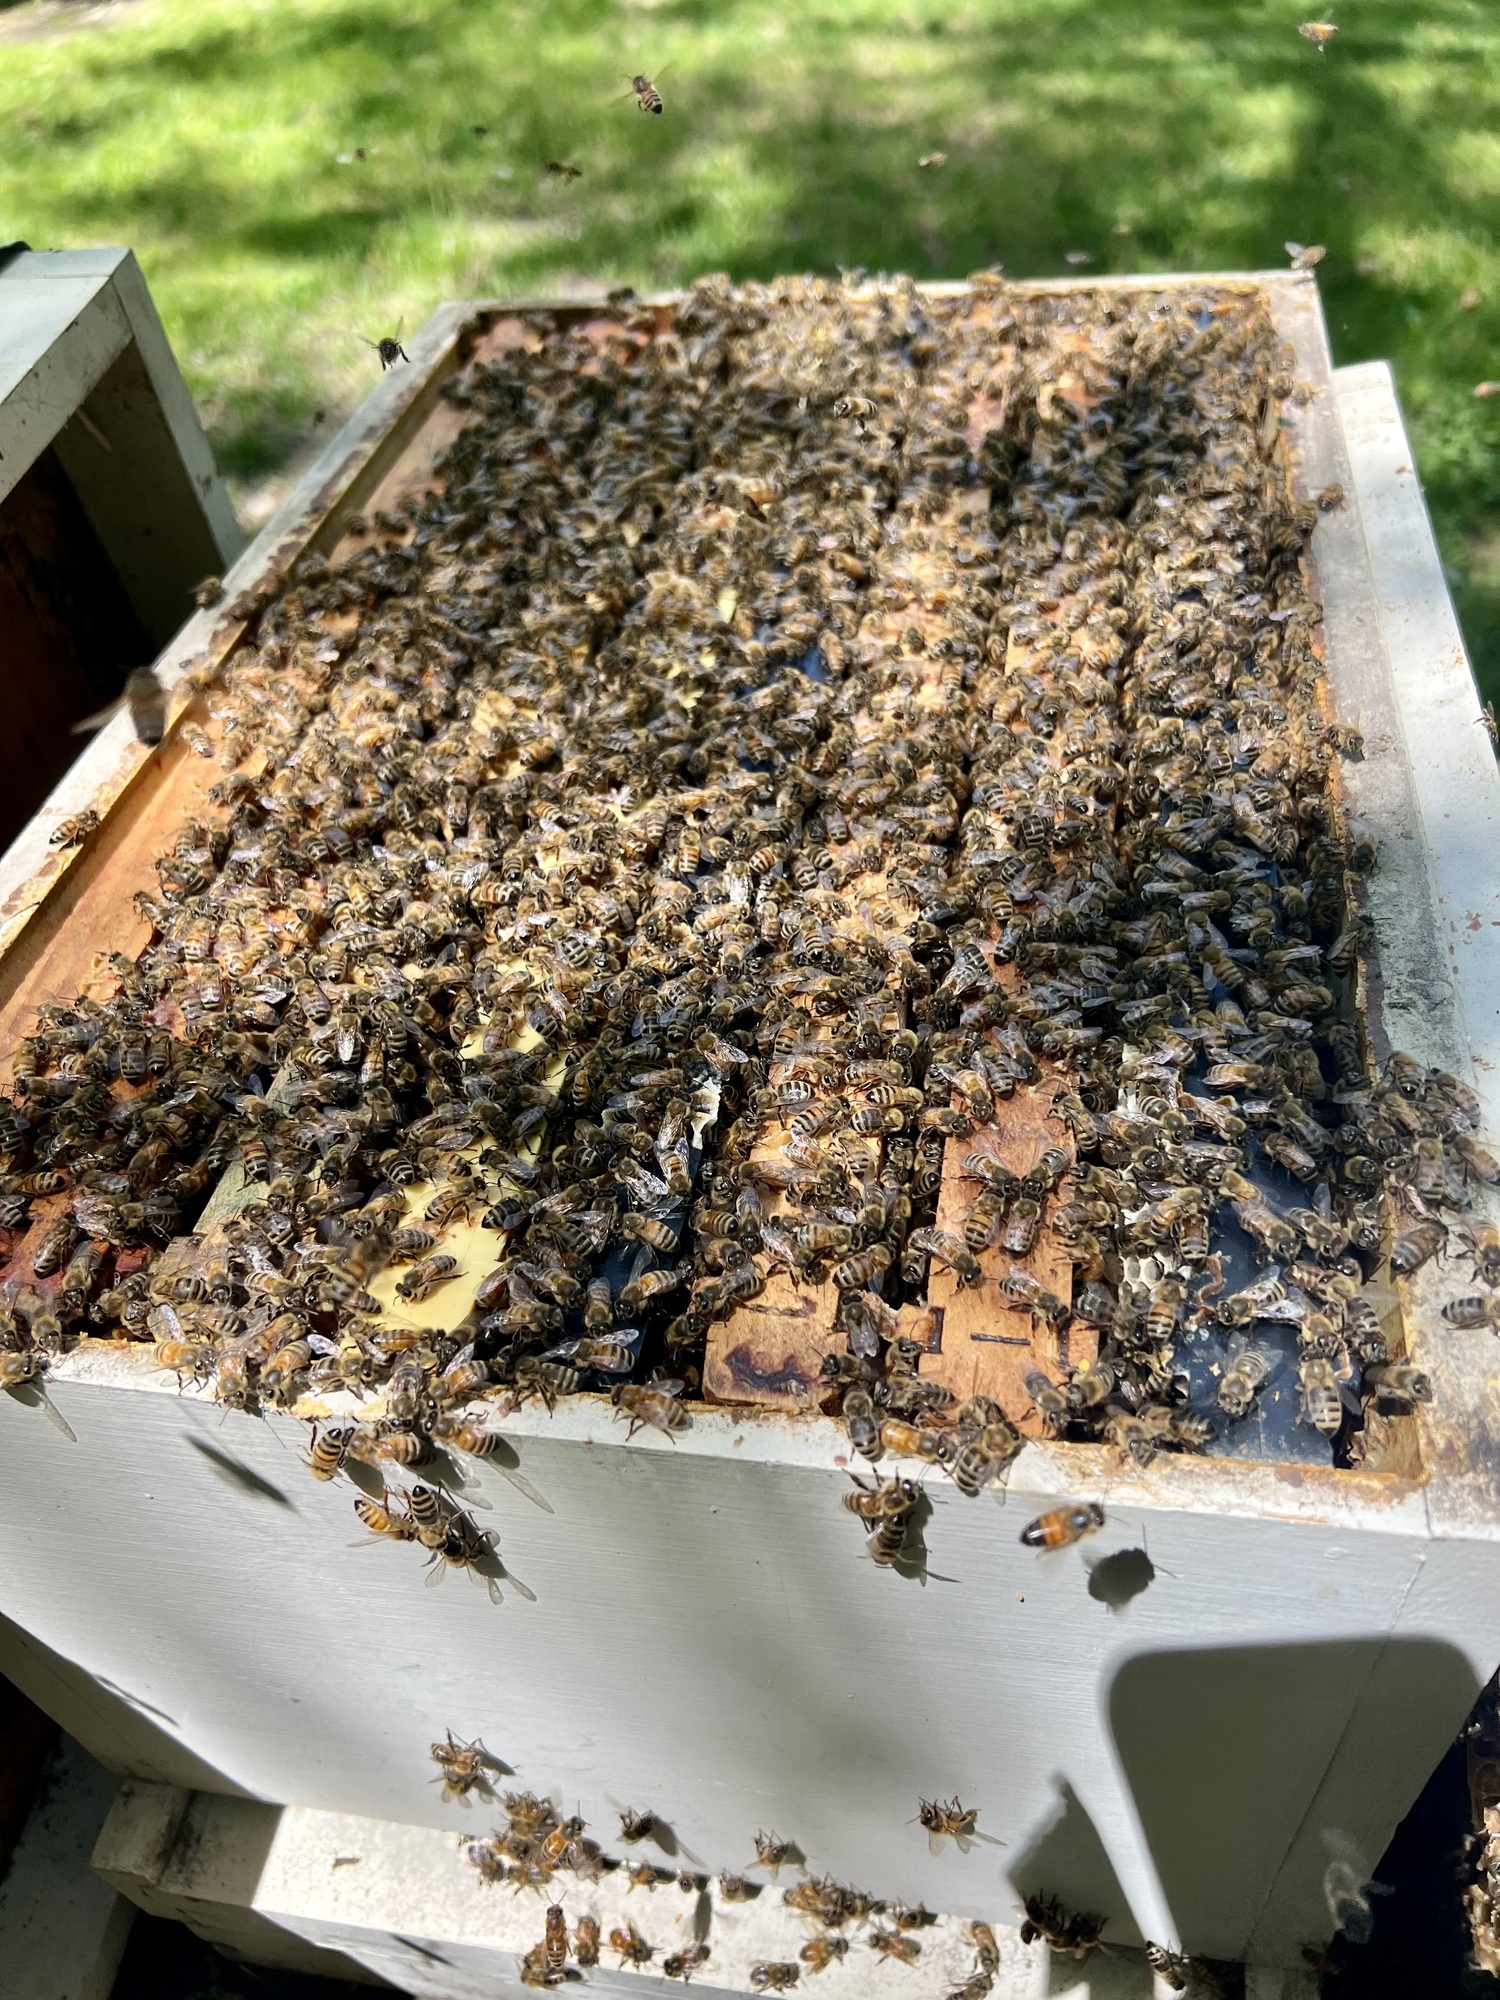 After a bad start, the bees settled into their new home quite happily. LISA DAFFY